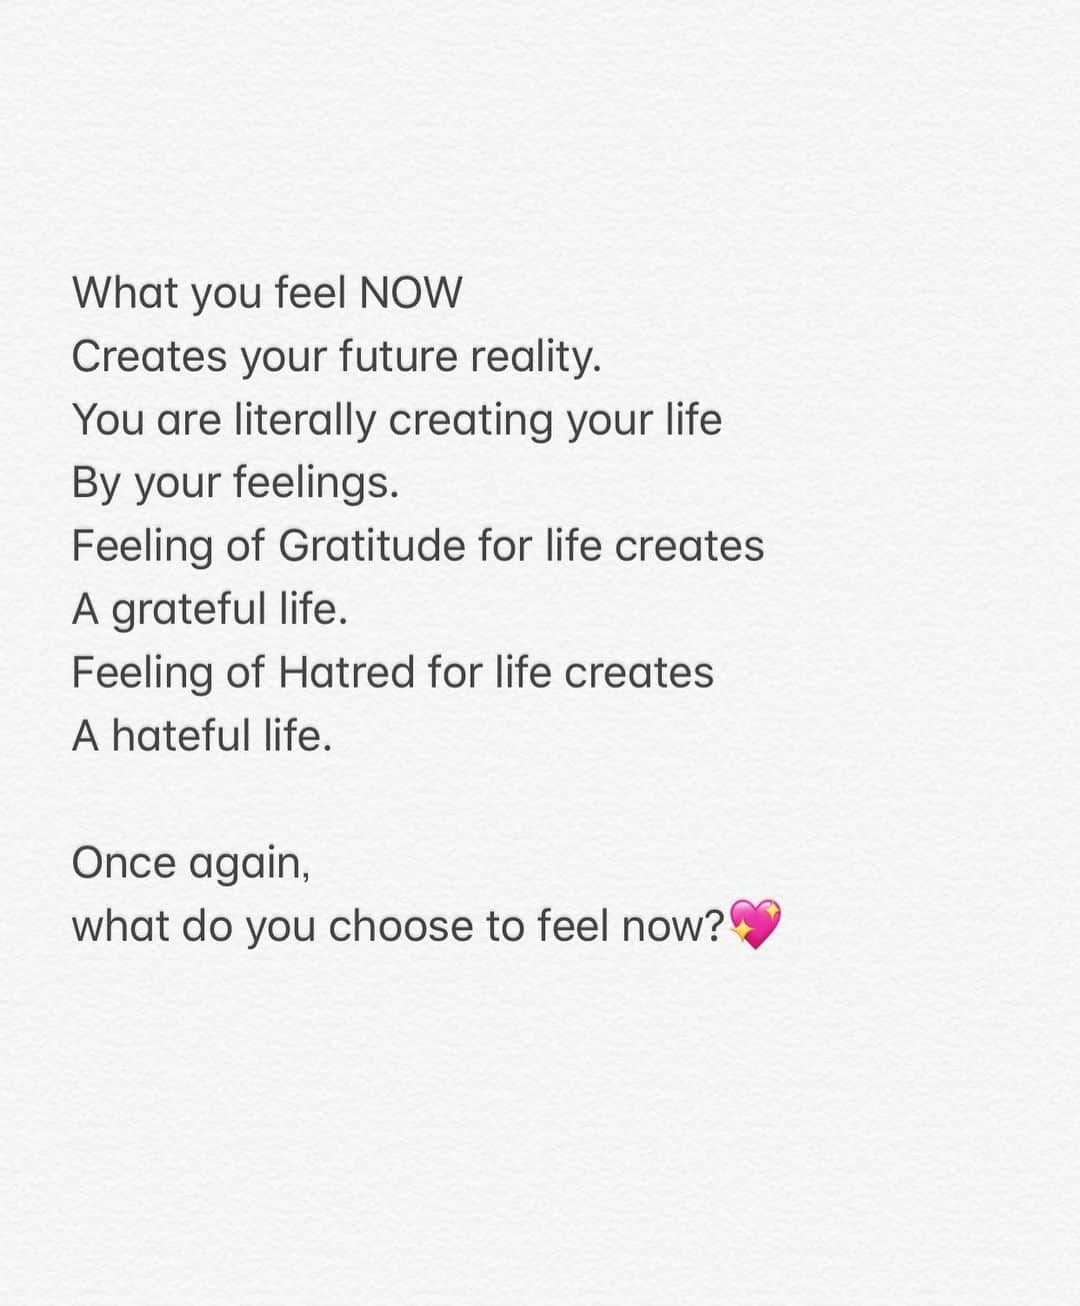 Natsuさんのインスタグラム写真 - (NatsuInstagram)「💖 Embrace, Give thanks, Be present For whatever you experience right now Because You can’t experience NOW ever again. You can grow only in the now You can heal only in the now You can choose to be happy only in the now Nothing is happening in the past Nor in the future. Now is the only place where Magic happens.  What do you choose to feel NOW?💖 . What you feel NOW Creates your future reality. You are literally creating your life By your feelings. Feeling of Gratitude for life creates A grateful life. Feeling of Hatred for life creates A hateful life.  Once again, what do you choose to feel now?💖 . . #オンラインマガジン更新しました 🛸」11月25日 23時06分 - _natsurose_